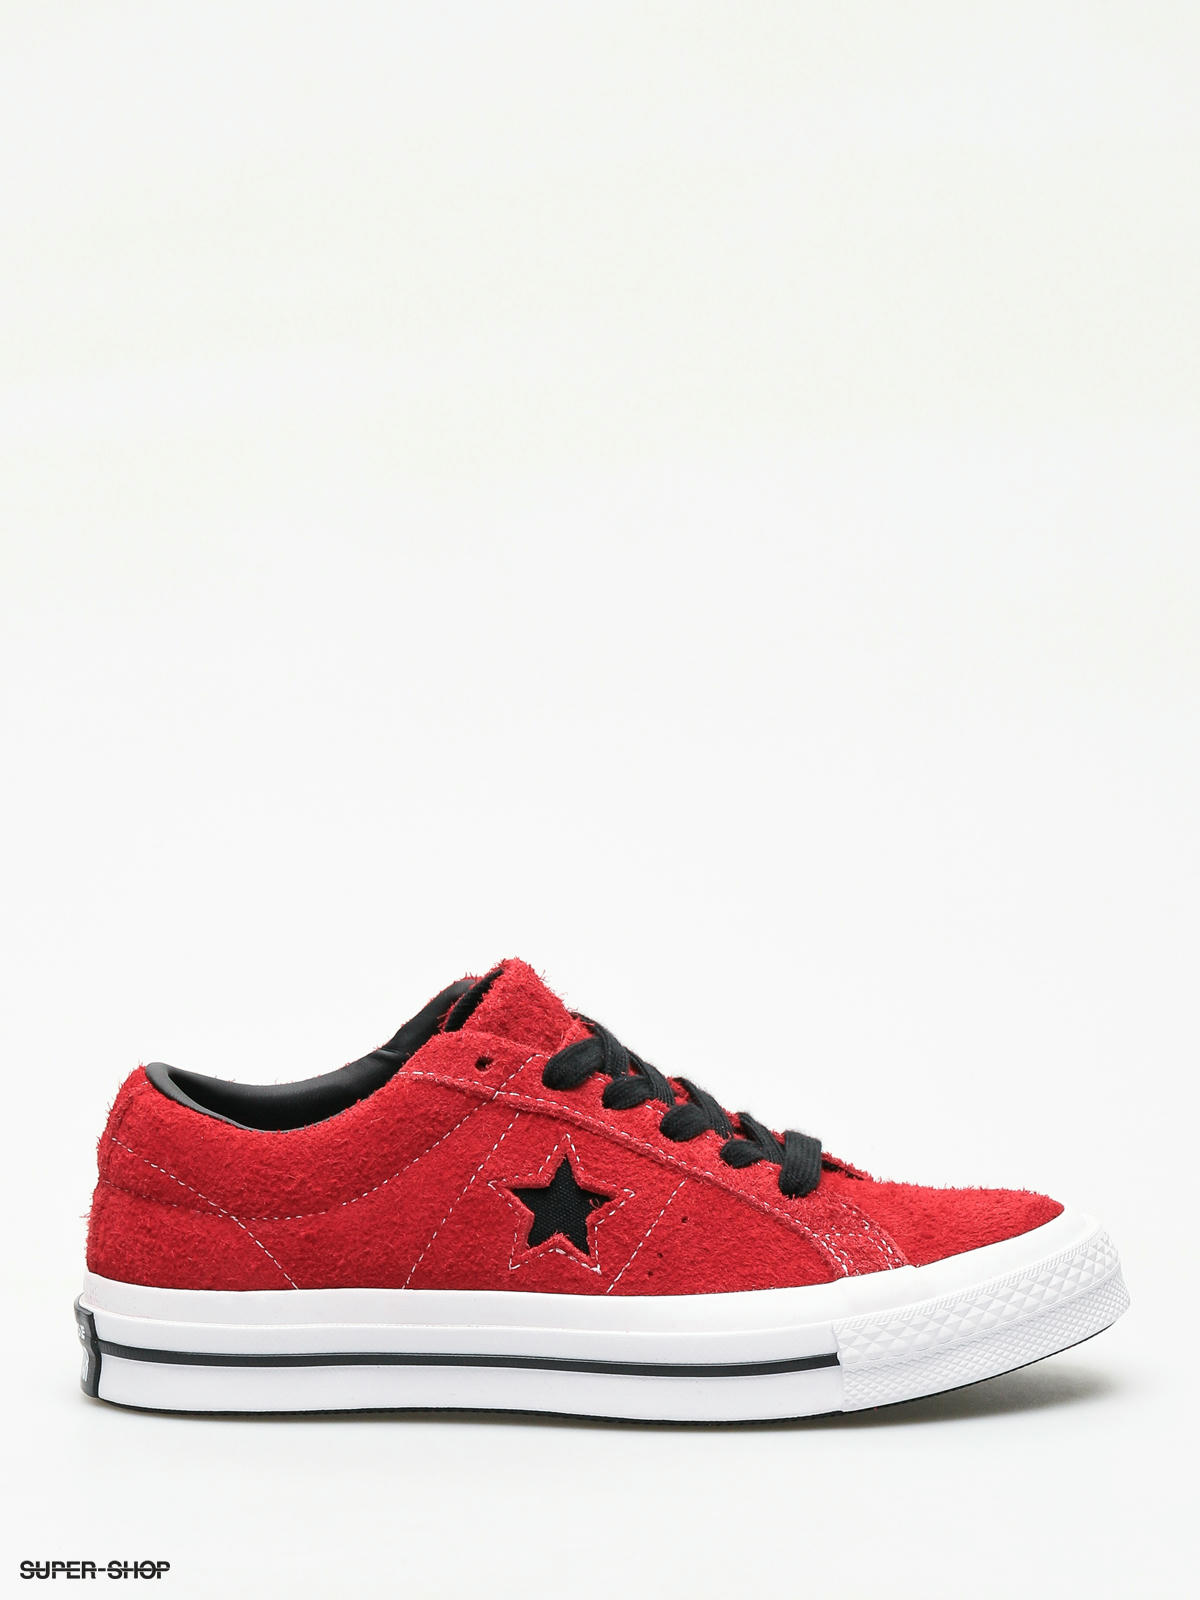 converse one star white red